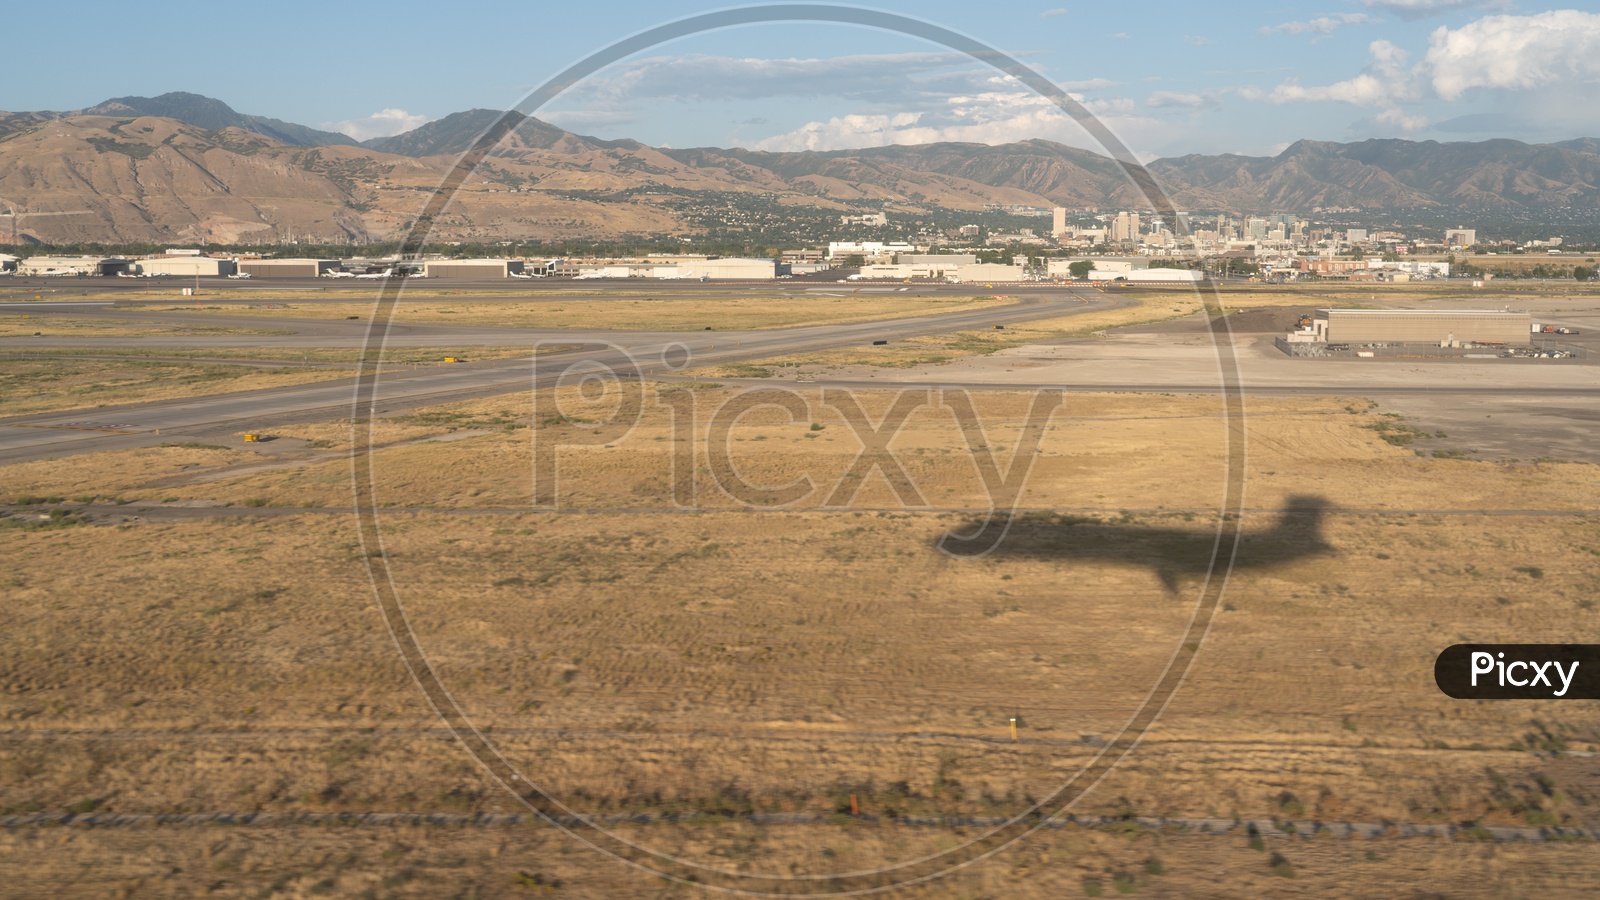 Aerial view of Shadow of Airplane against Wasatch Mountain ranges